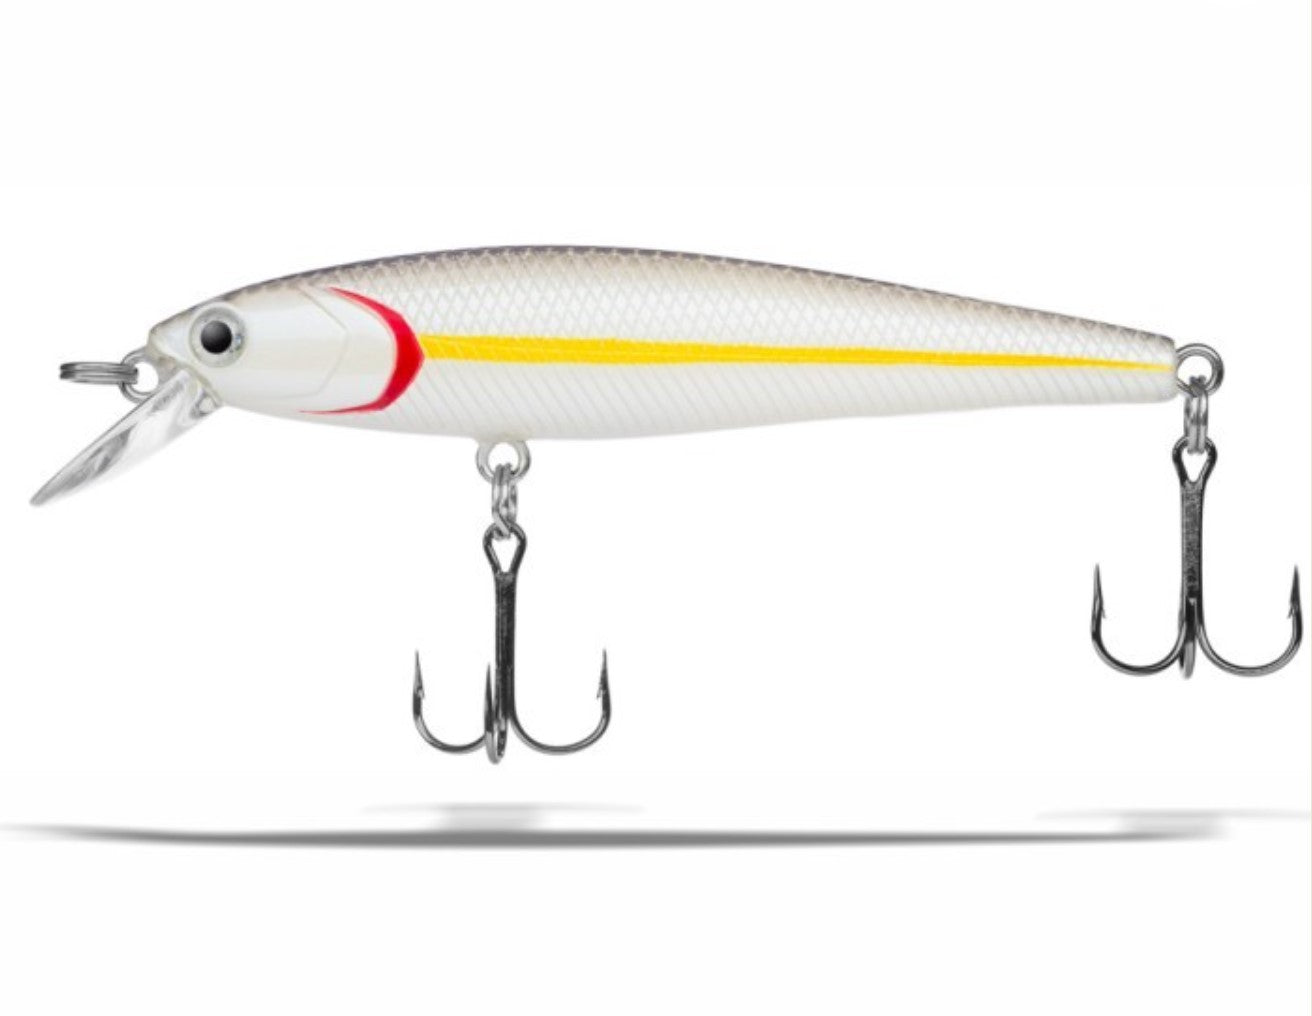 Dynamic Lures J-Spec (Chartreuse Shad) – Trophy Trout Lures and Fly Fishing